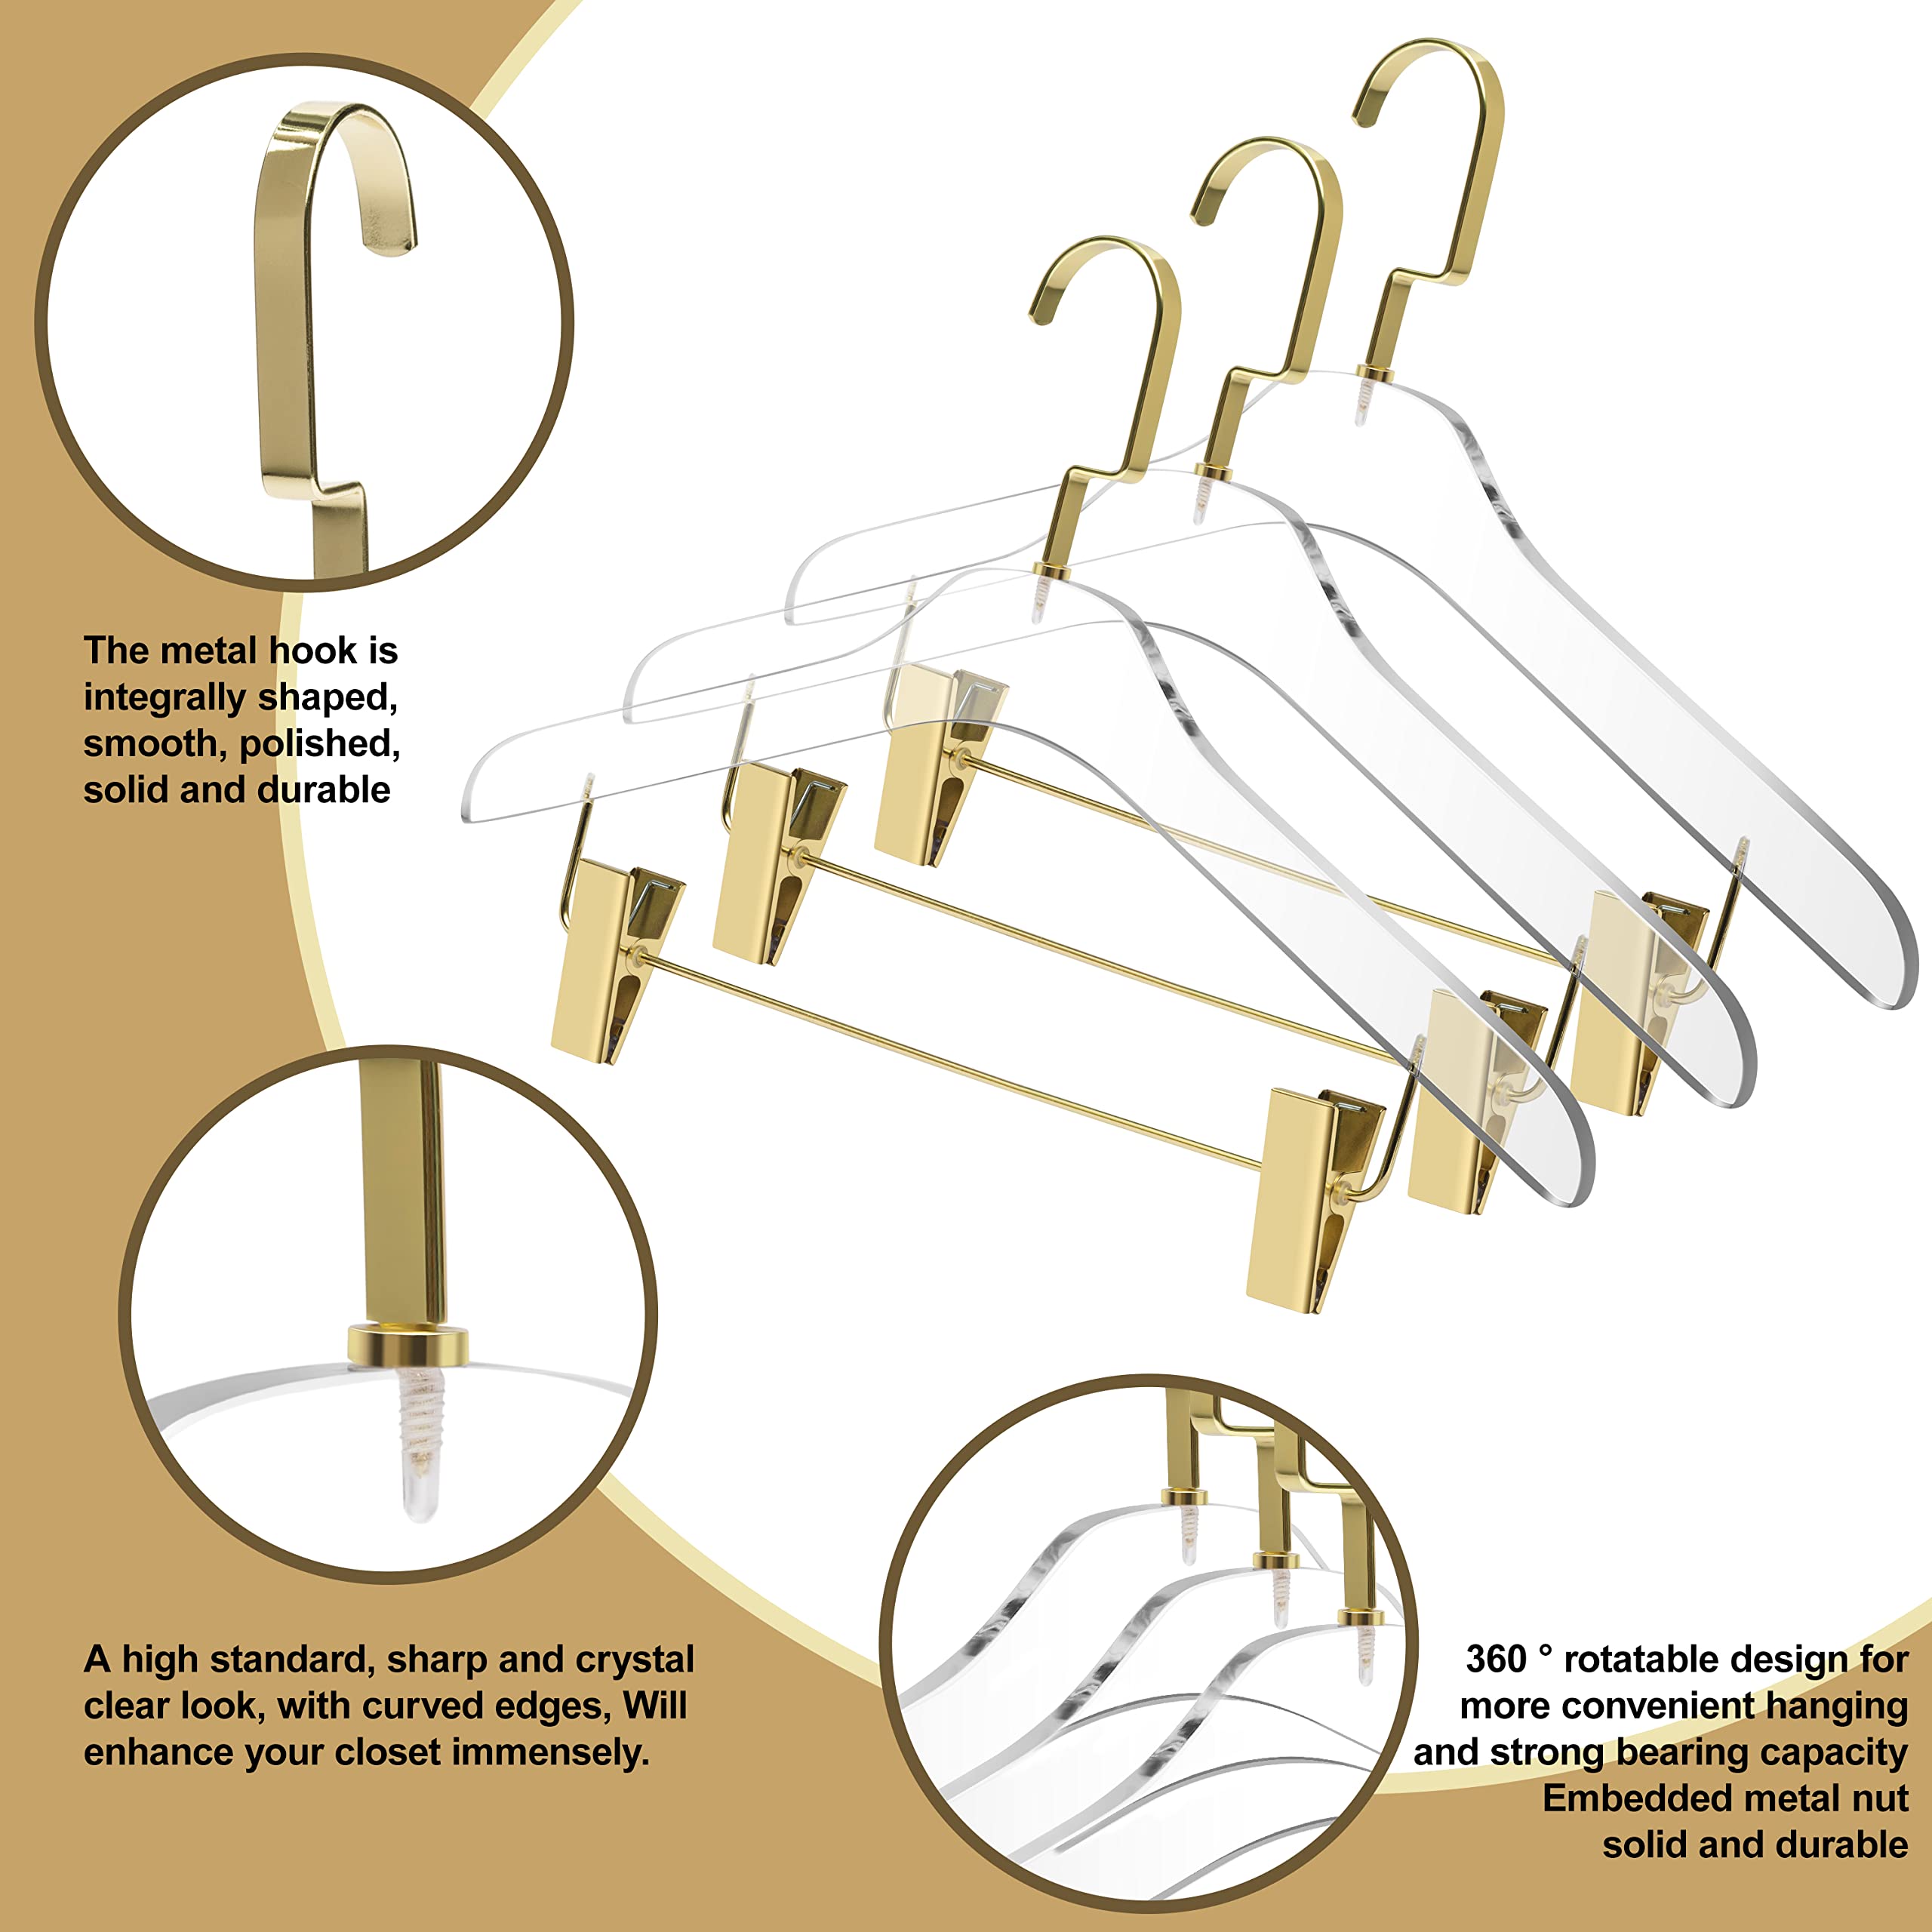 Quality Clear Acrylic Skirt Pant Hangers with Clips � 4 Pack, Stylish Clothes Hanger with Gold Hooks - Coat Hanger for Dress, Suit - Closet Organizer Adult Hangers - Cloth Hangers (Gold Hook, 4)  - Very Good